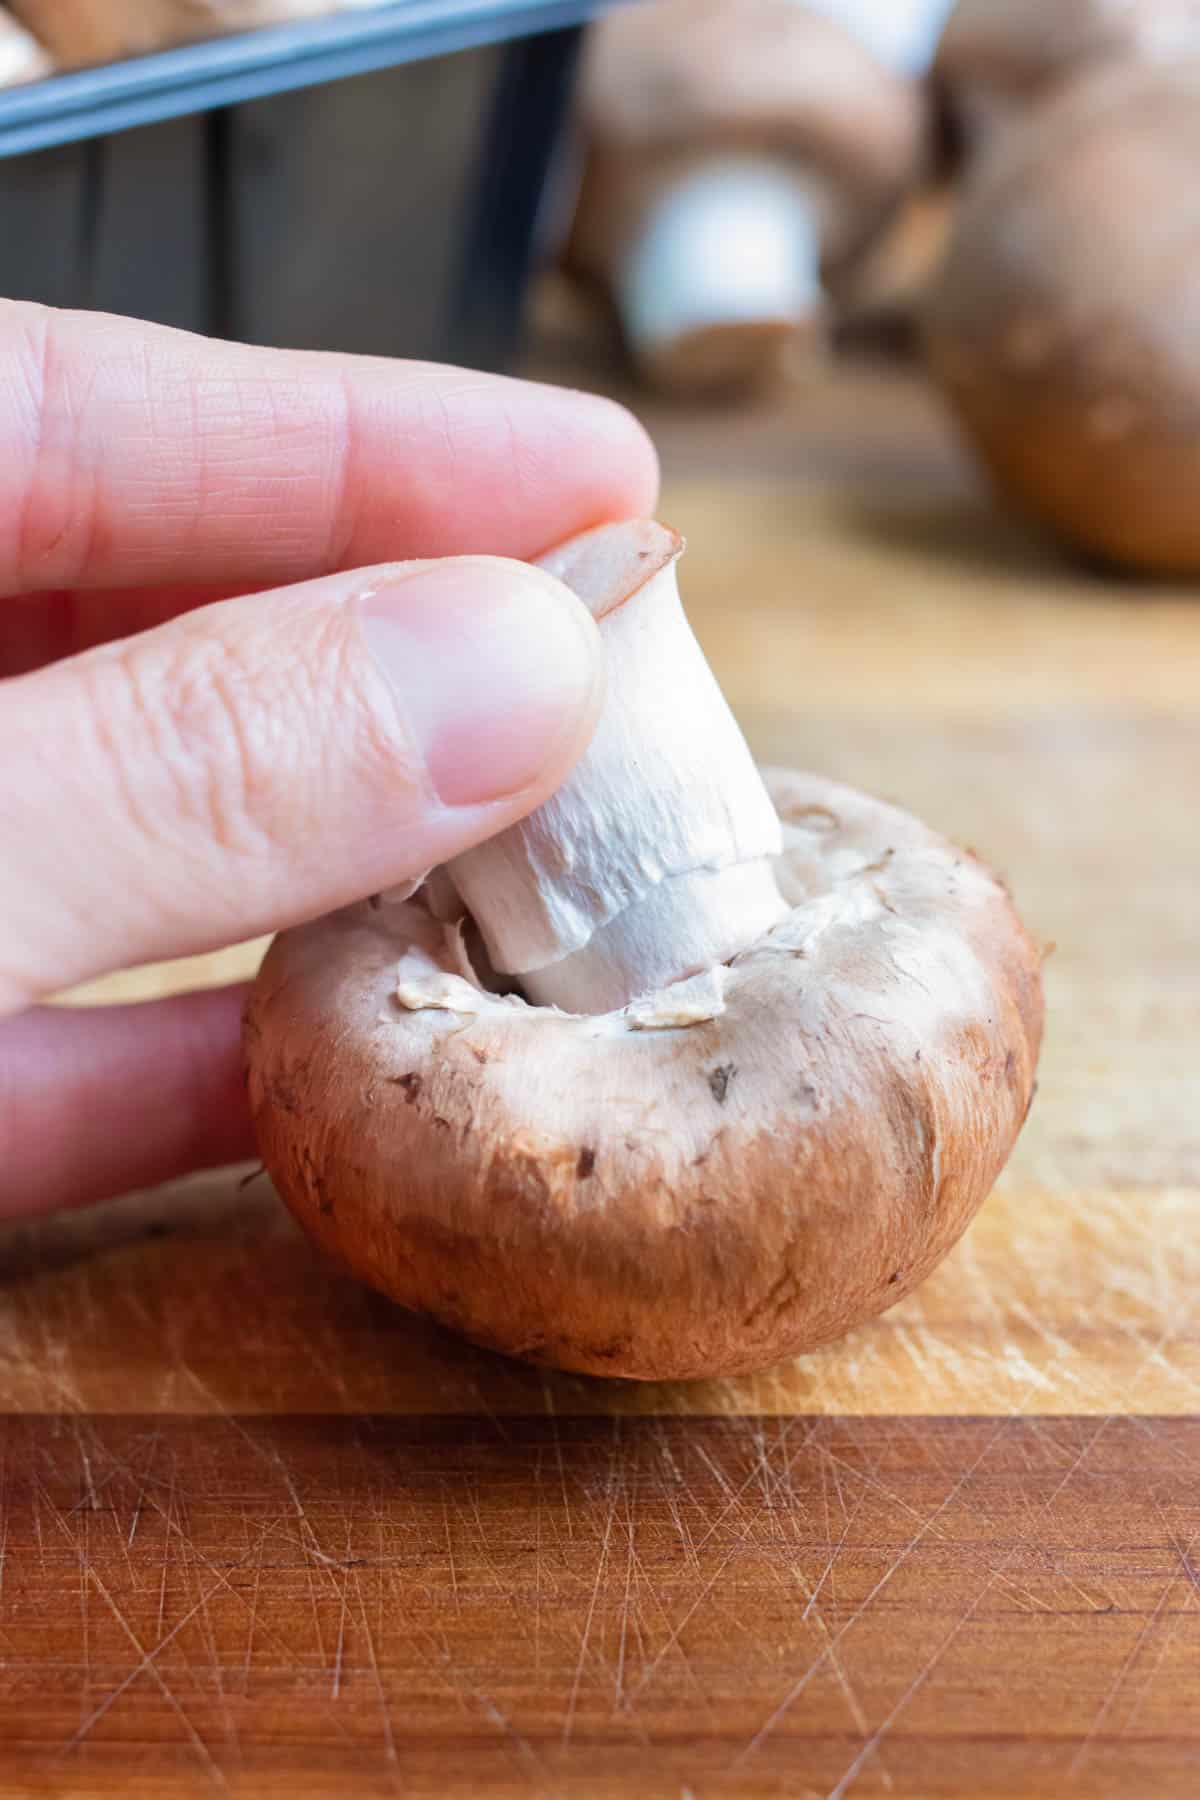 The stem of the mushroom is grabbed by your fingers before removing.